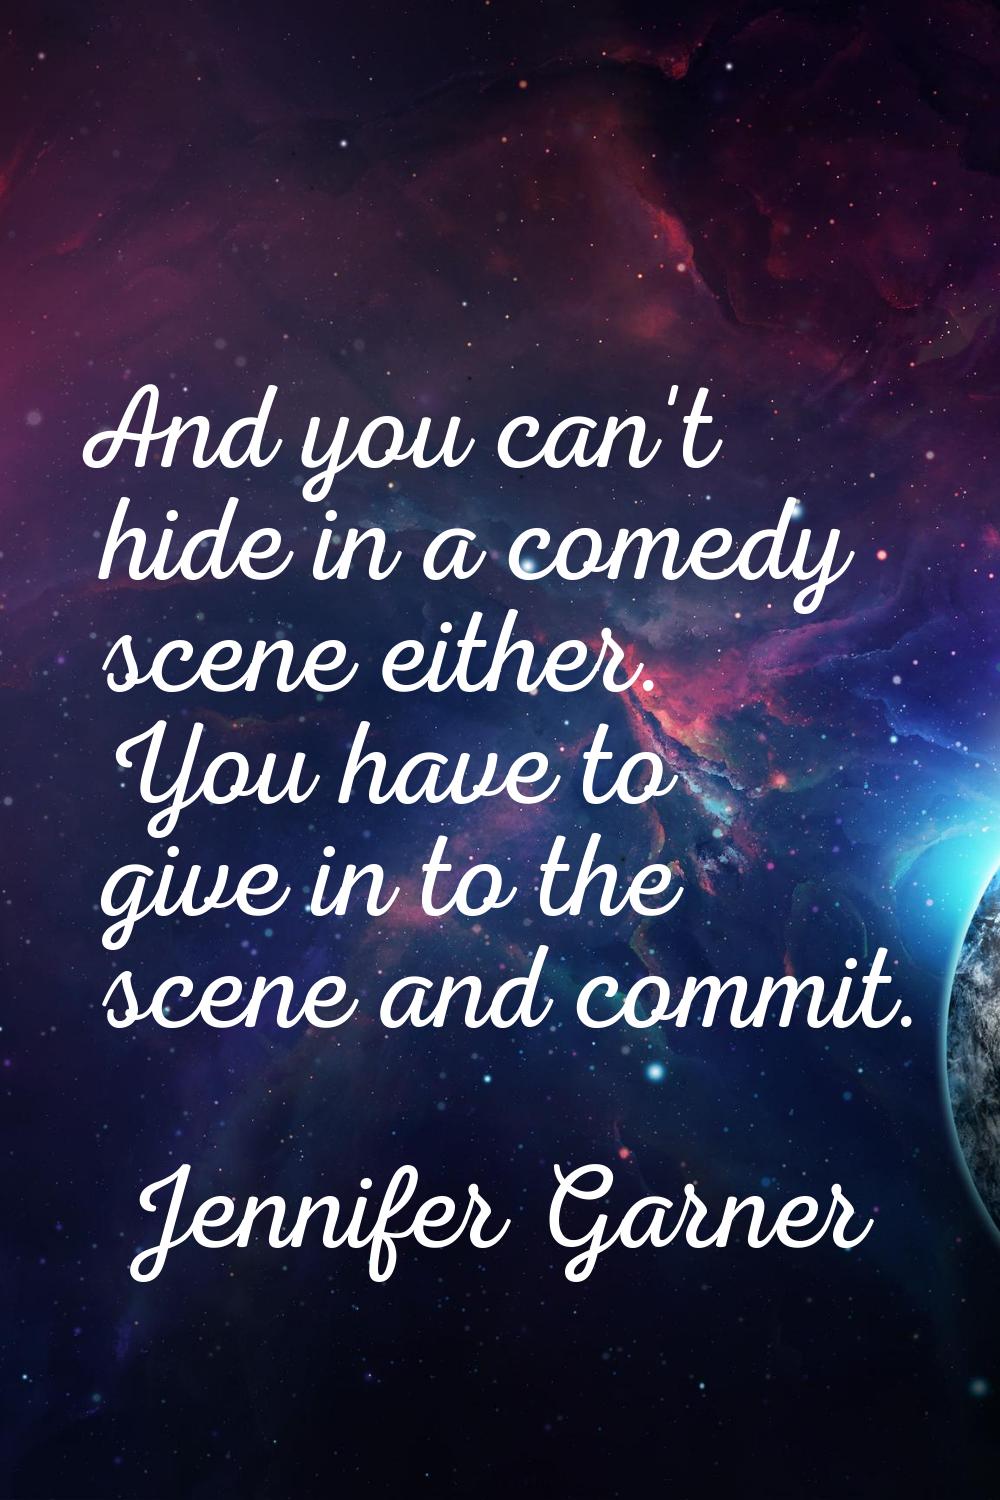 And you can't hide in a comedy scene either. You have to give in to the scene and commit.